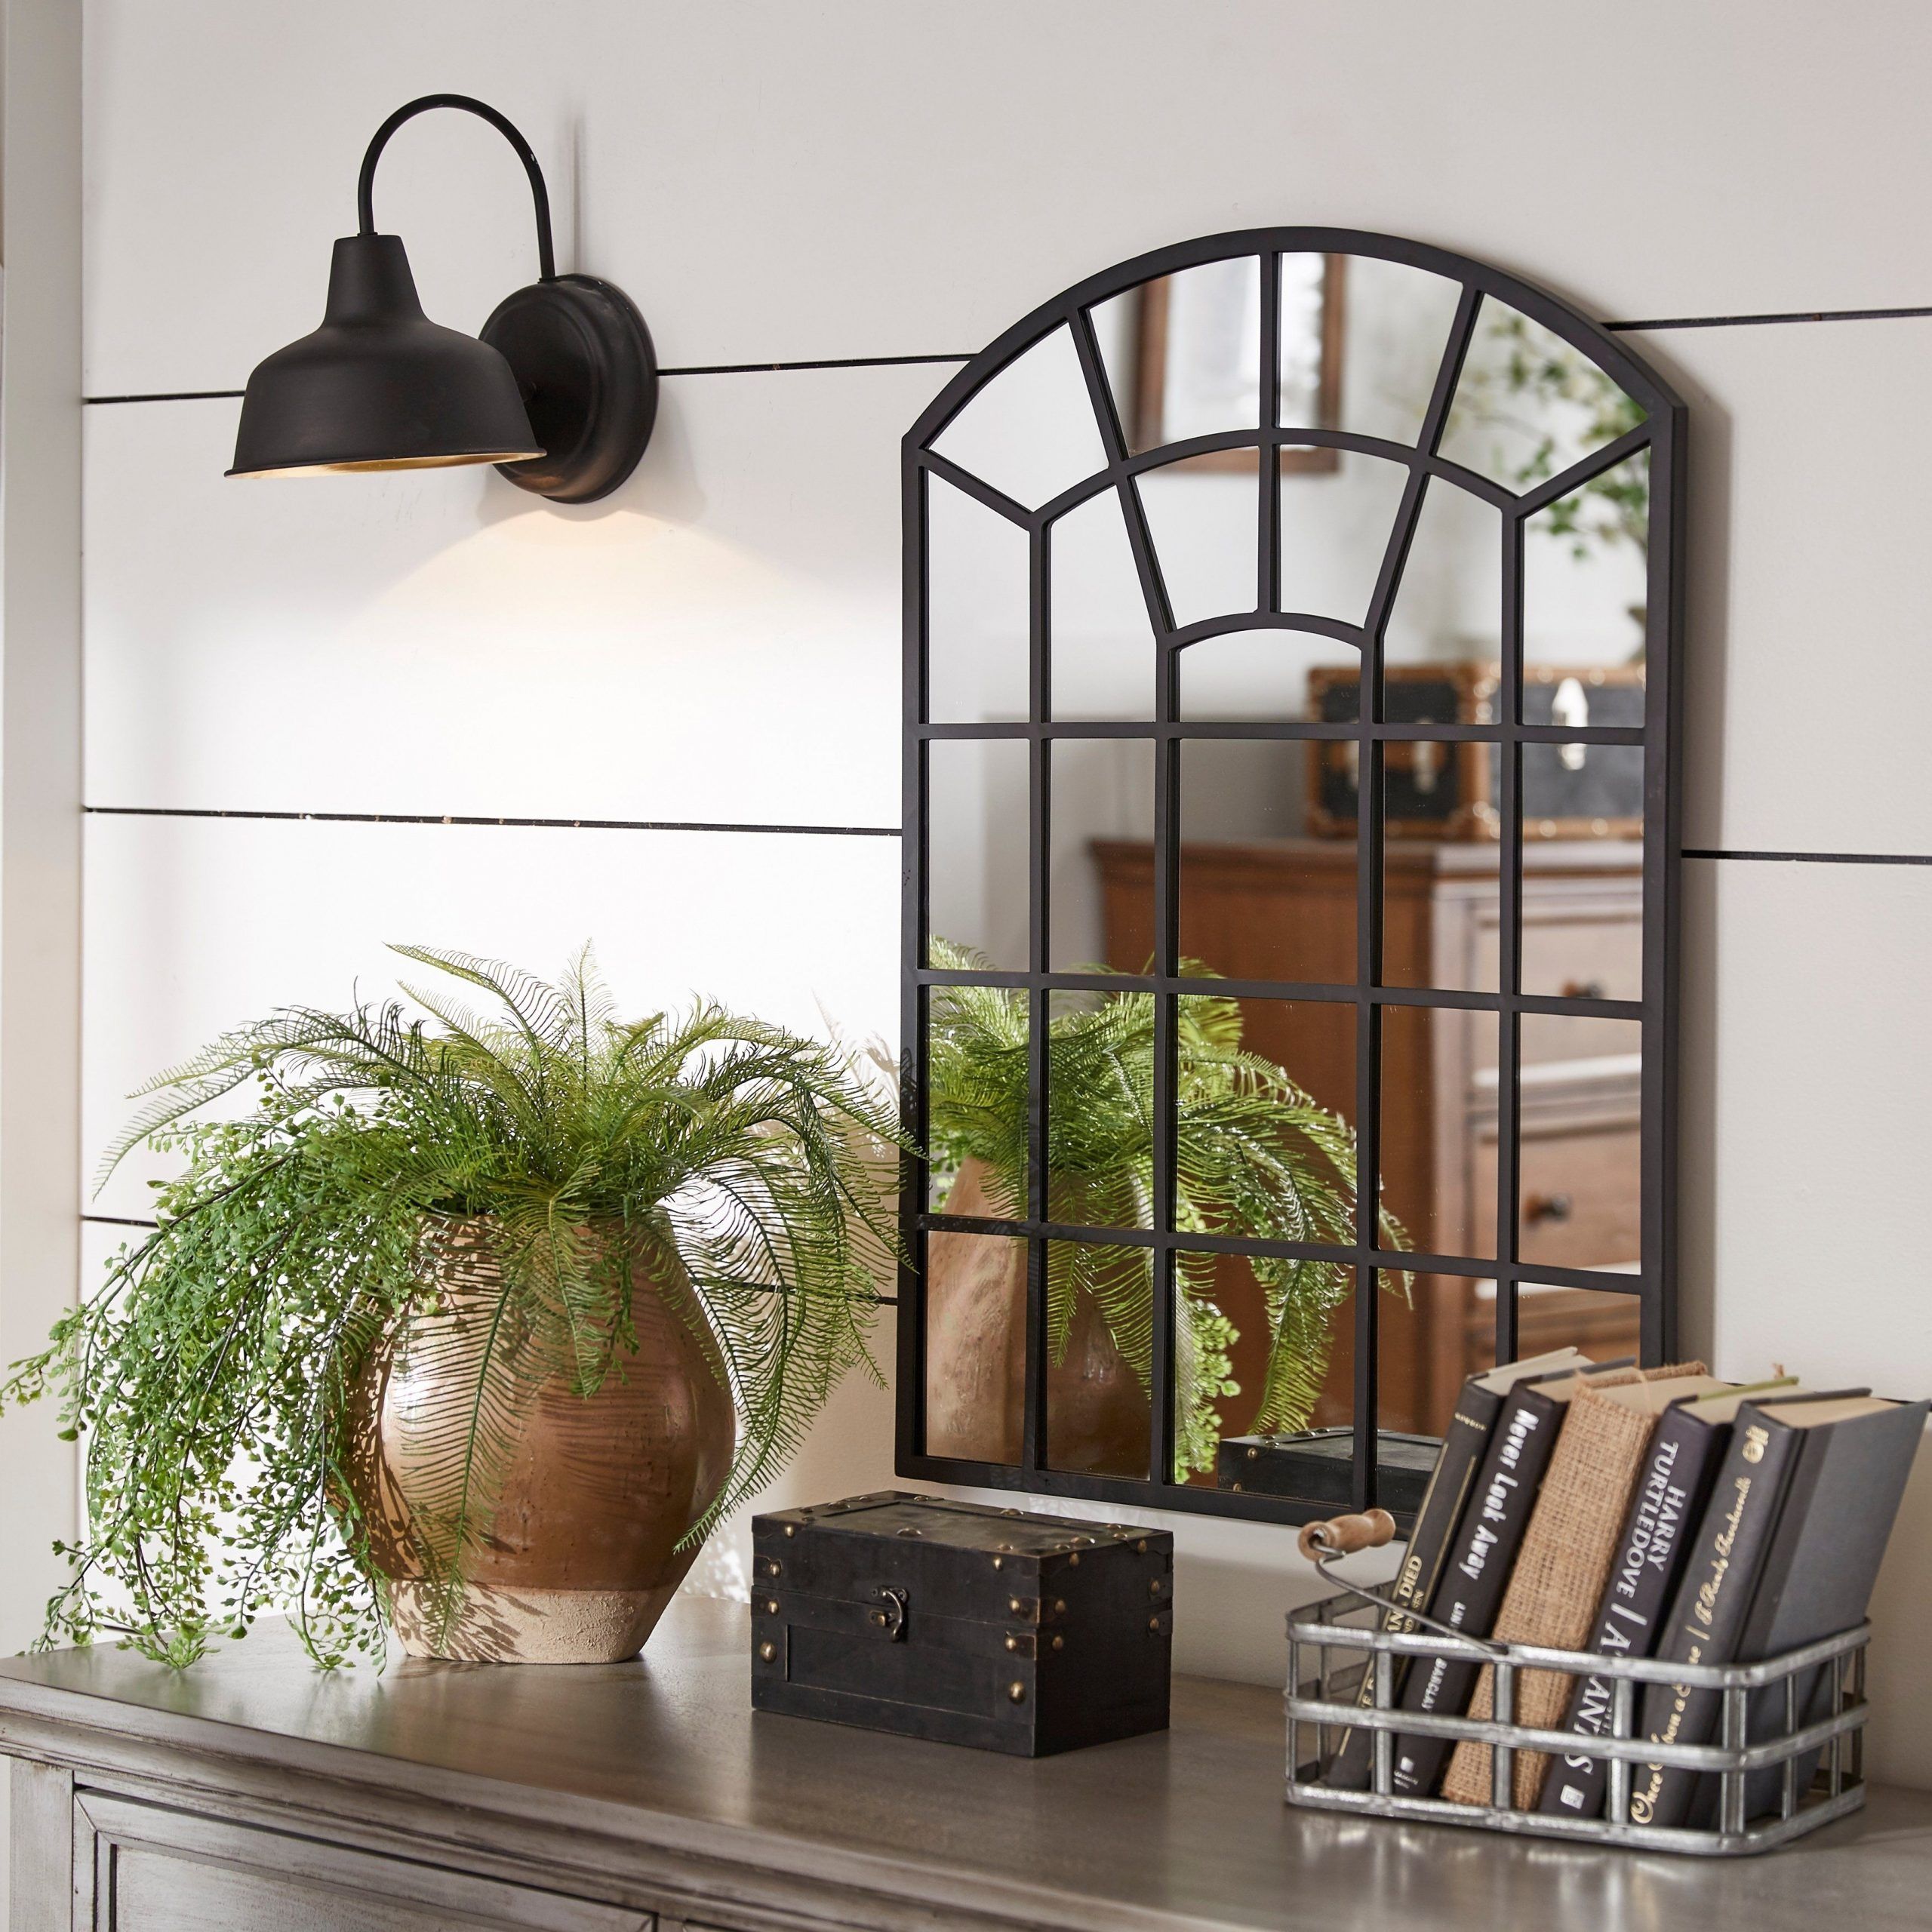 Surise Black Finish Metal Arched Windowpane Wall Mirrorinspire Q Within Black Metal Arch Wall Mirrors (View 11 of 15)